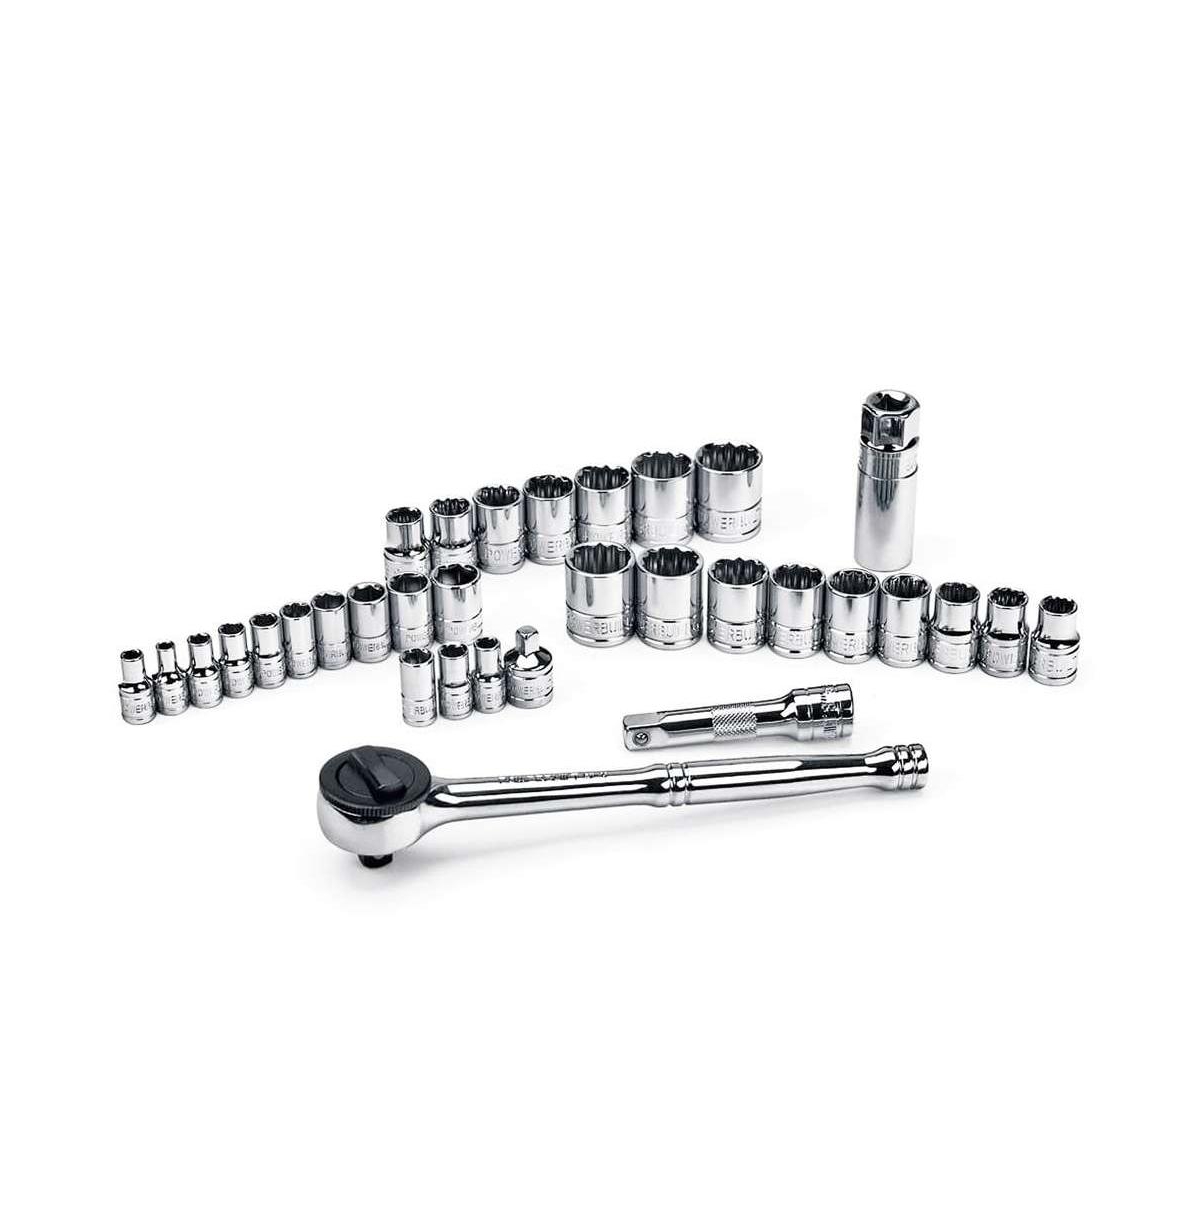 33 Piece Socket Set with Sae and Metric Sizes - Silver